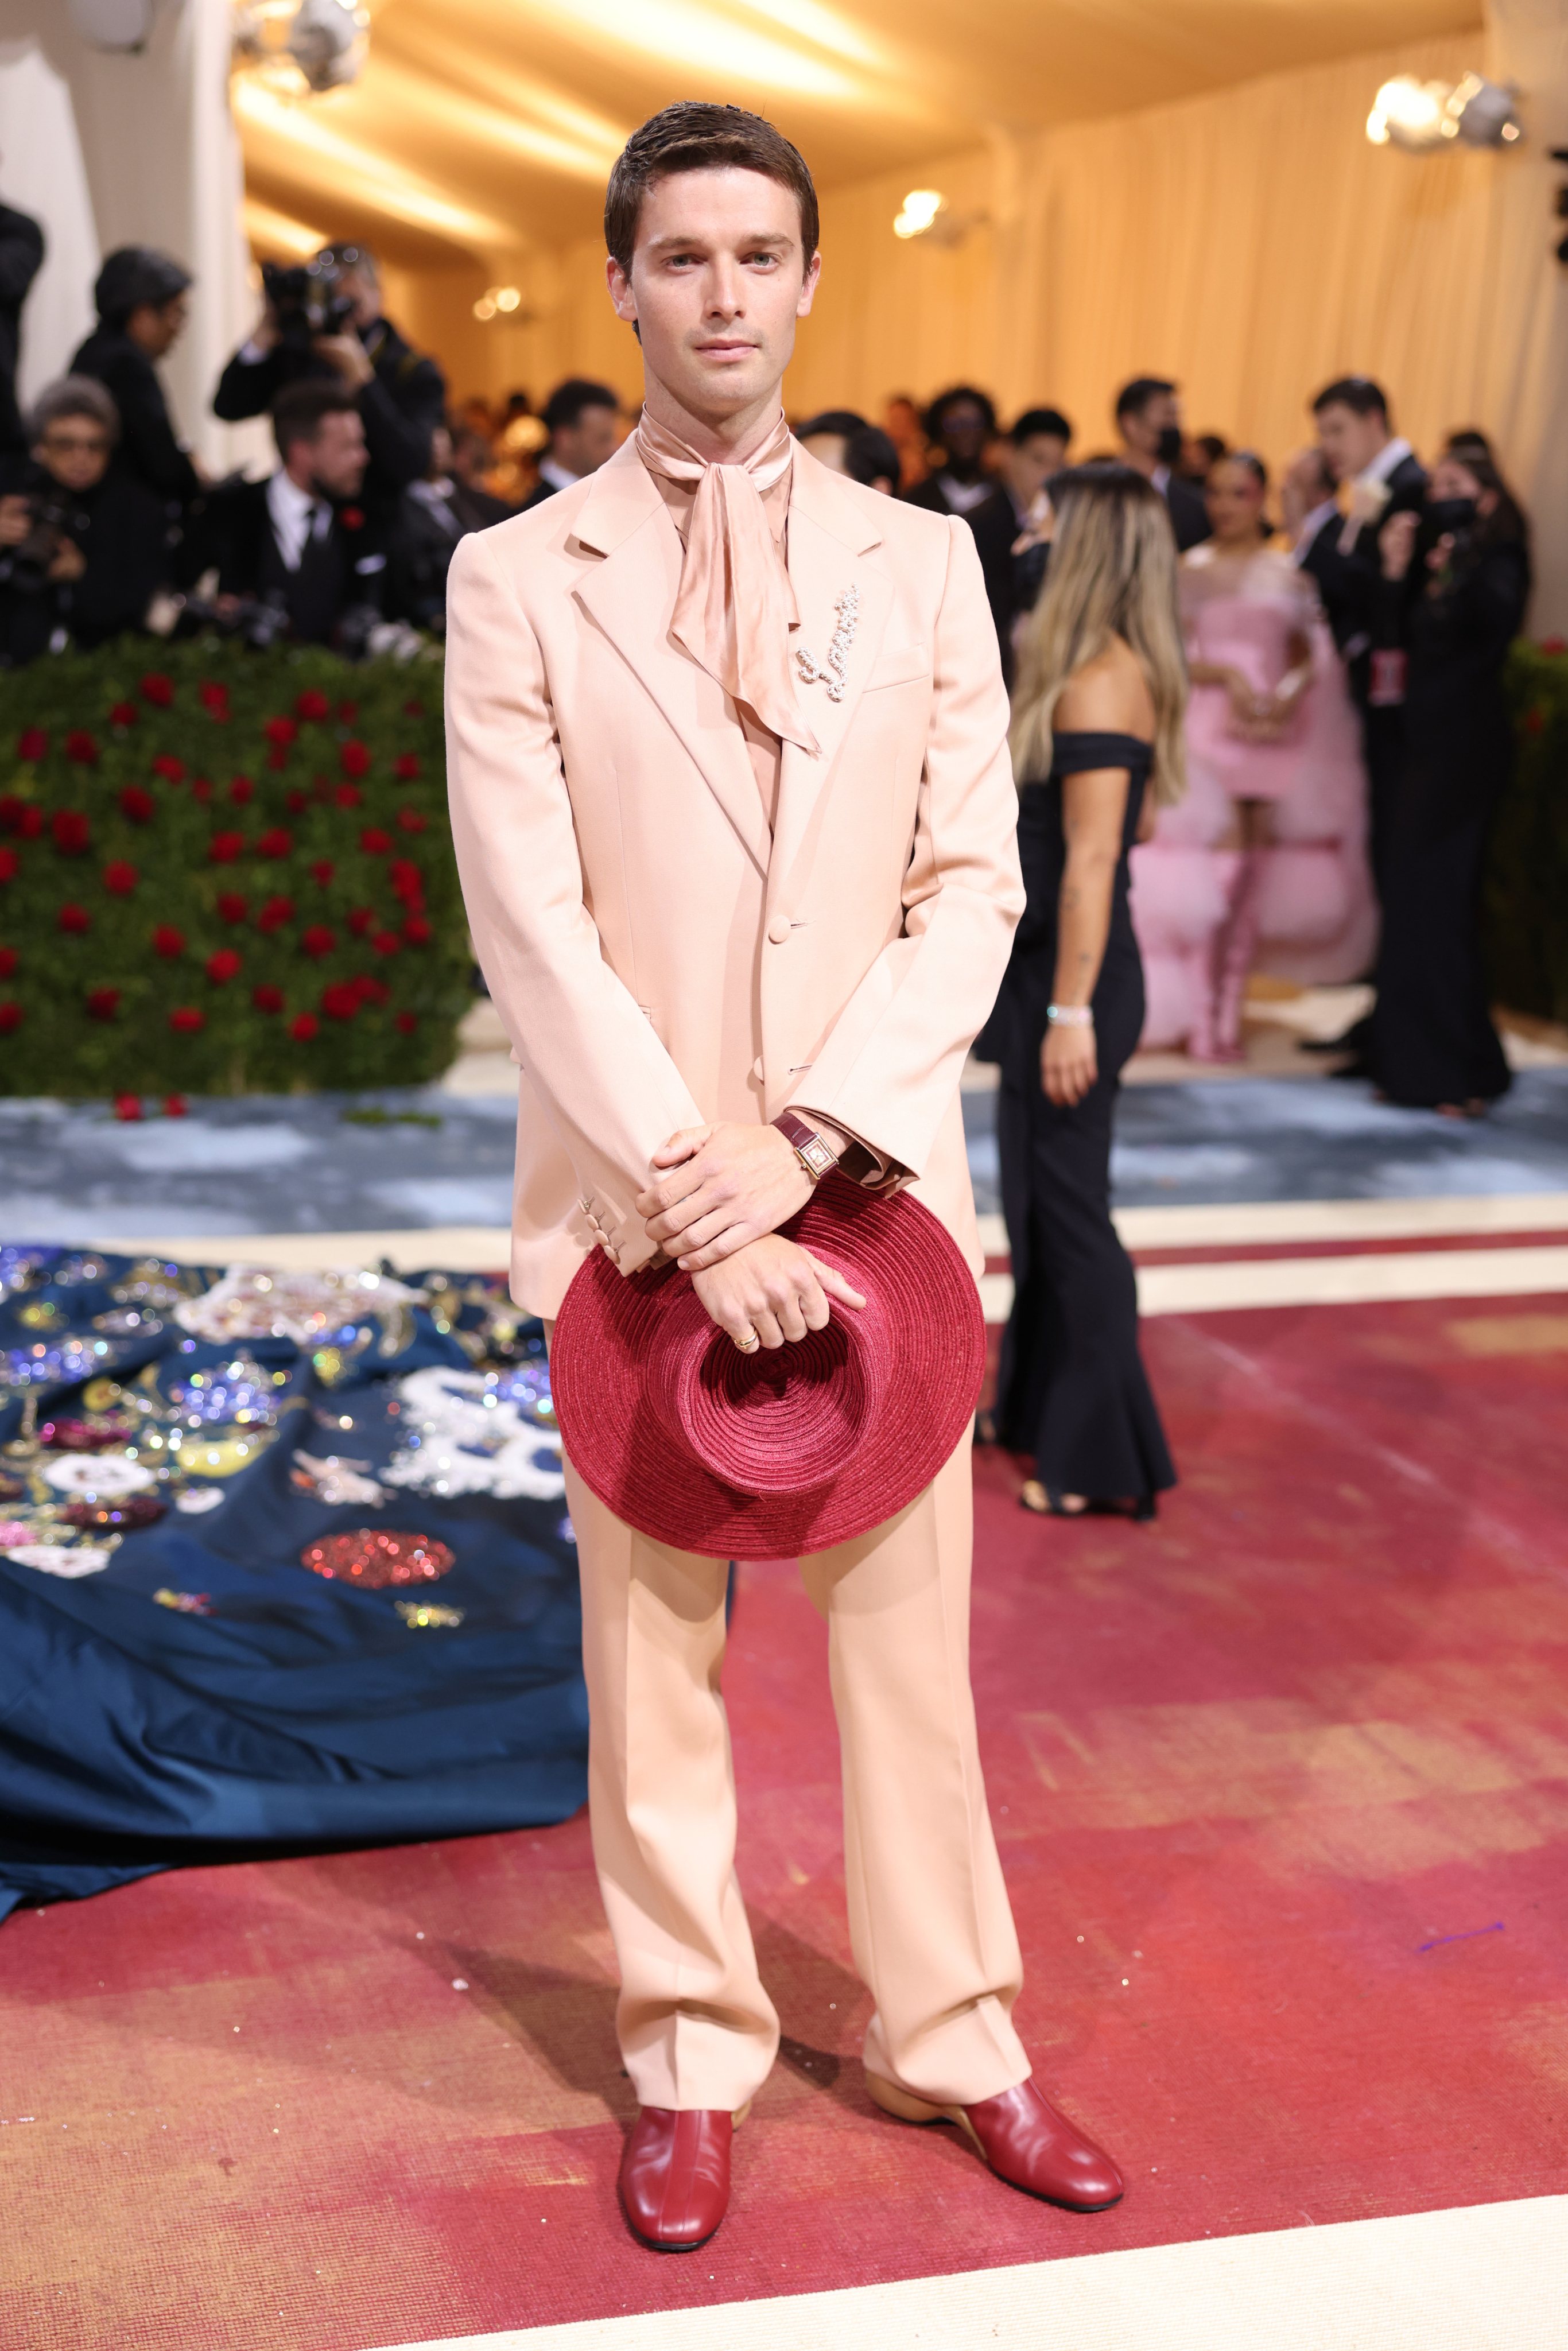 The 2022 Met Gala Celebrating &quot;In America: An Anthology of Fashion&quot; - Arrivals